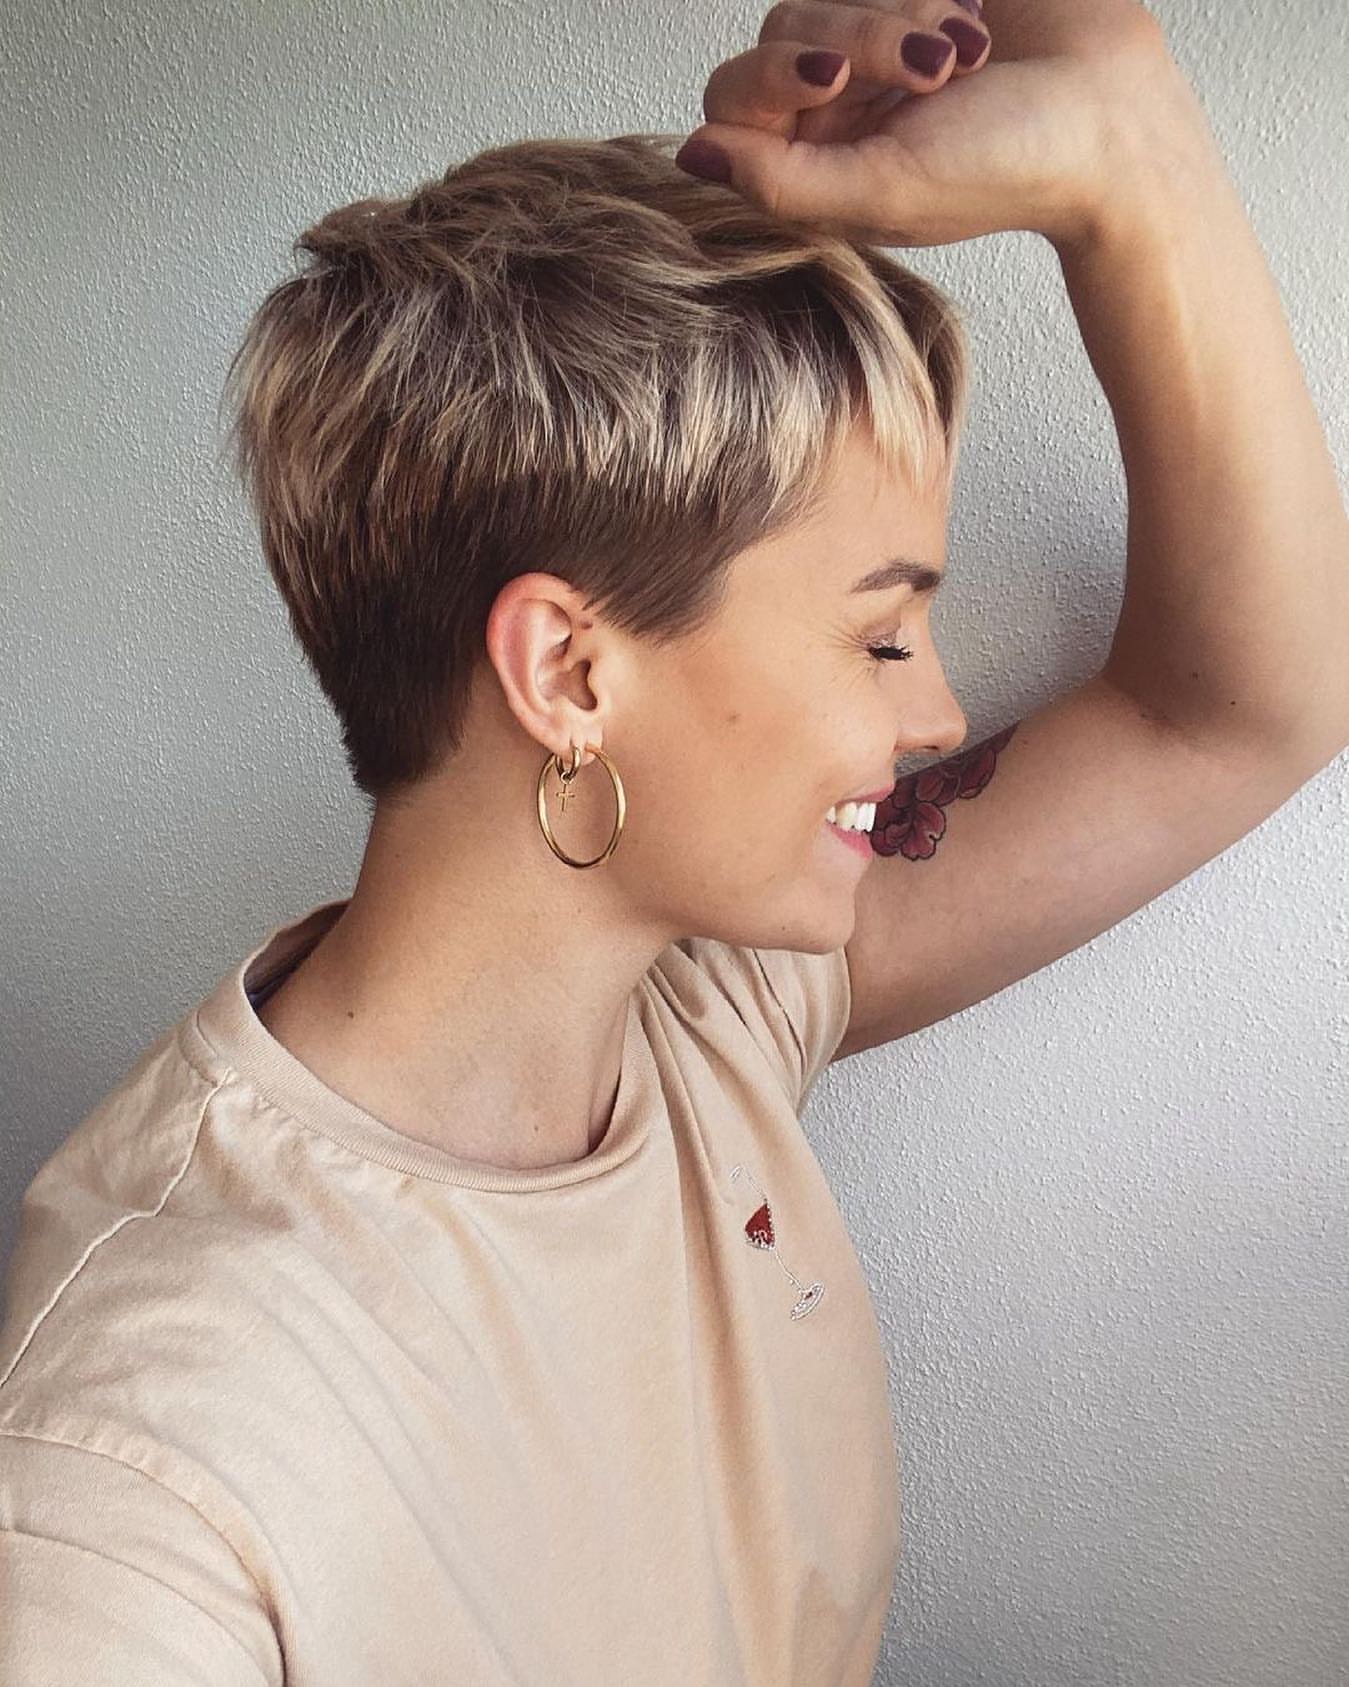 4 Simple & Cool Ways to Style a Pixie Cut For the Prom | January Girl